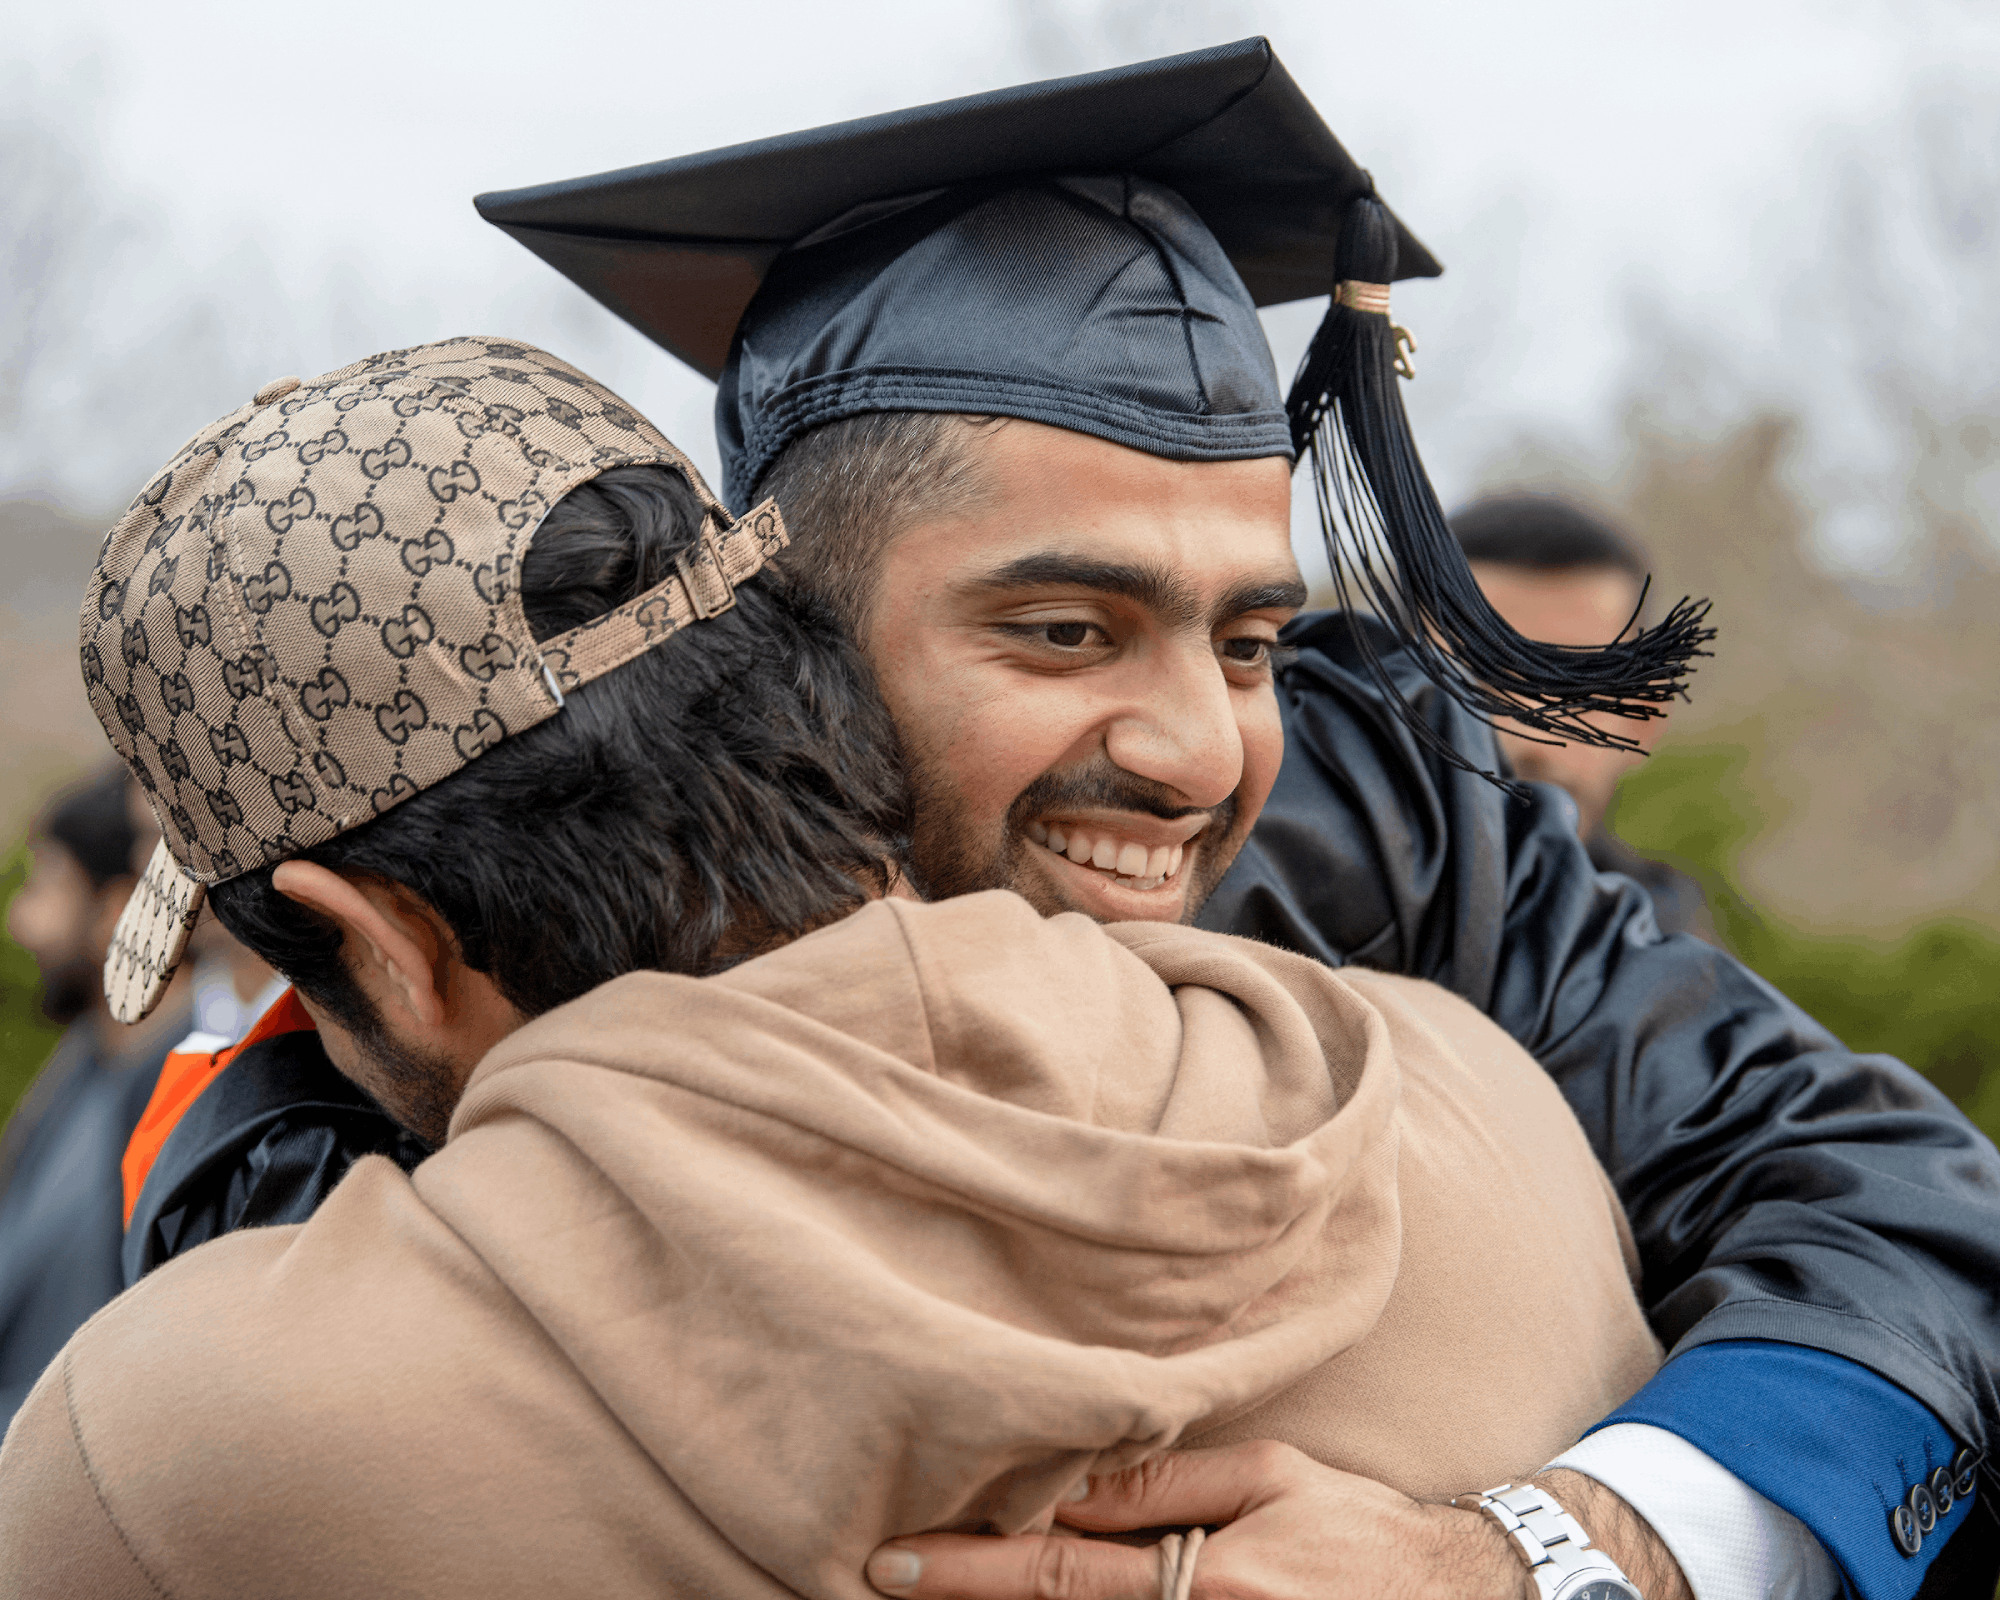 The graduates received a hug after the fall entrance ceremony.